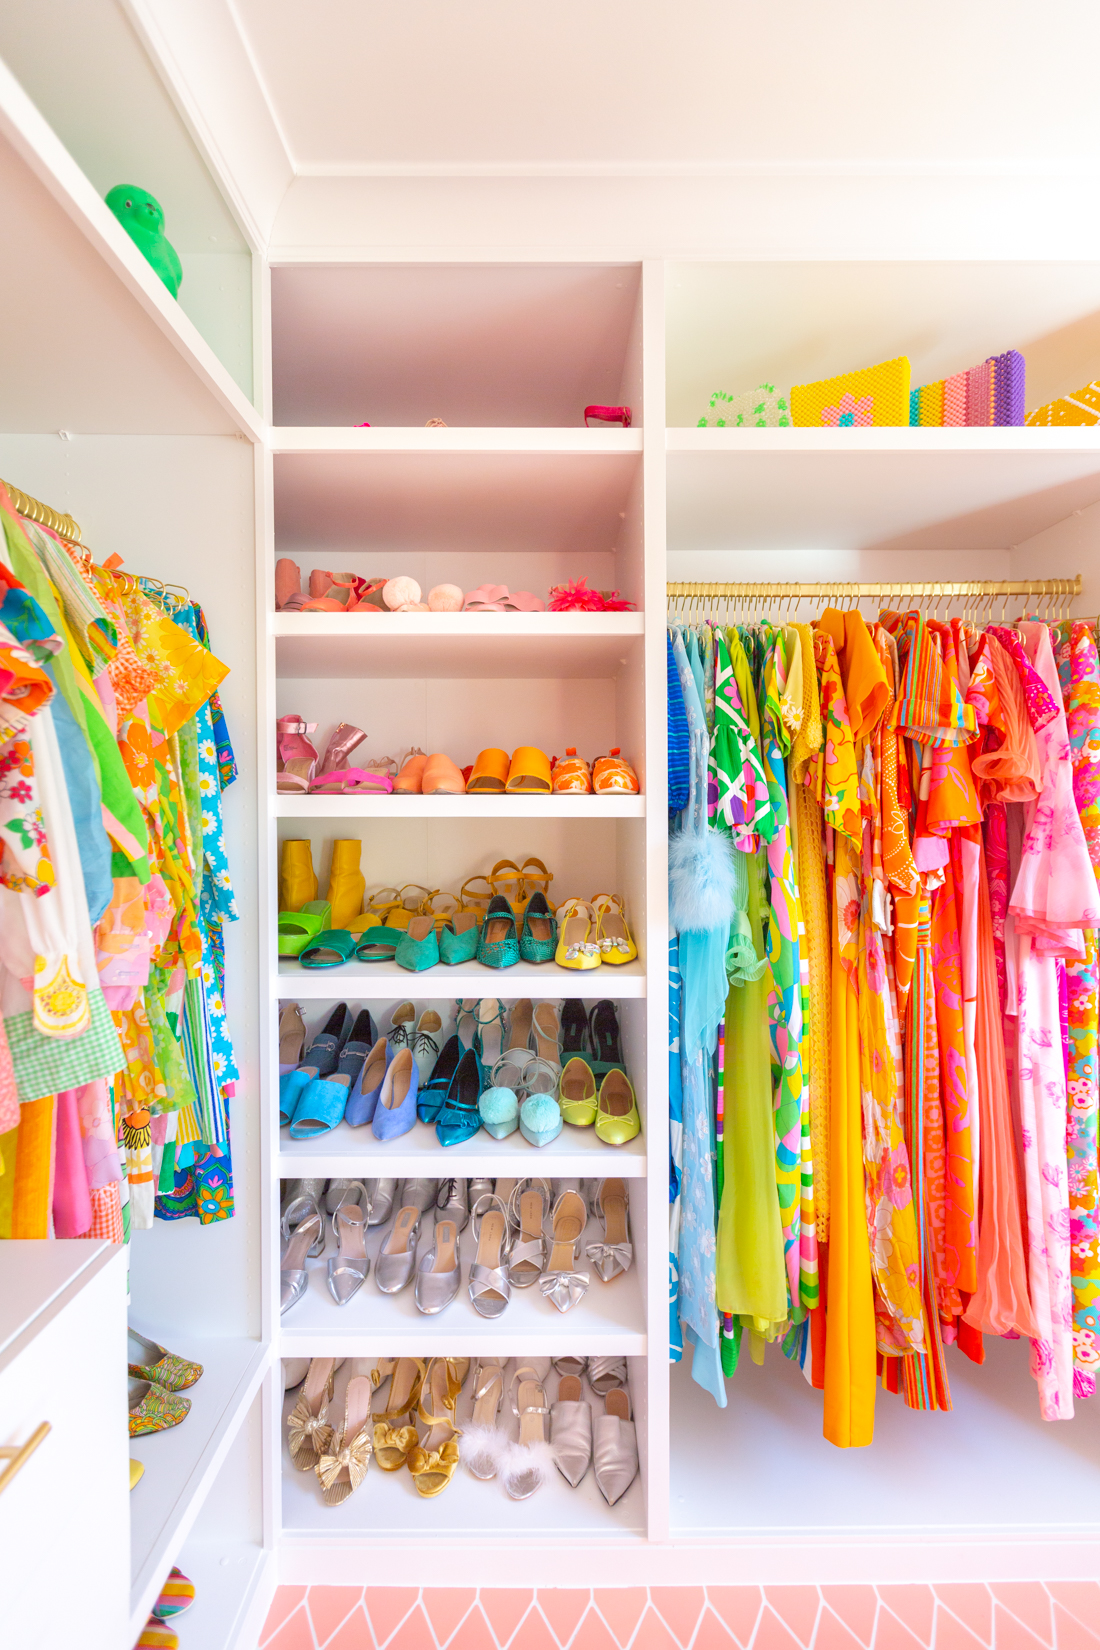 31 Cute Master Bedroom Closet Ideas You HAVE to See - Sponge Hacks